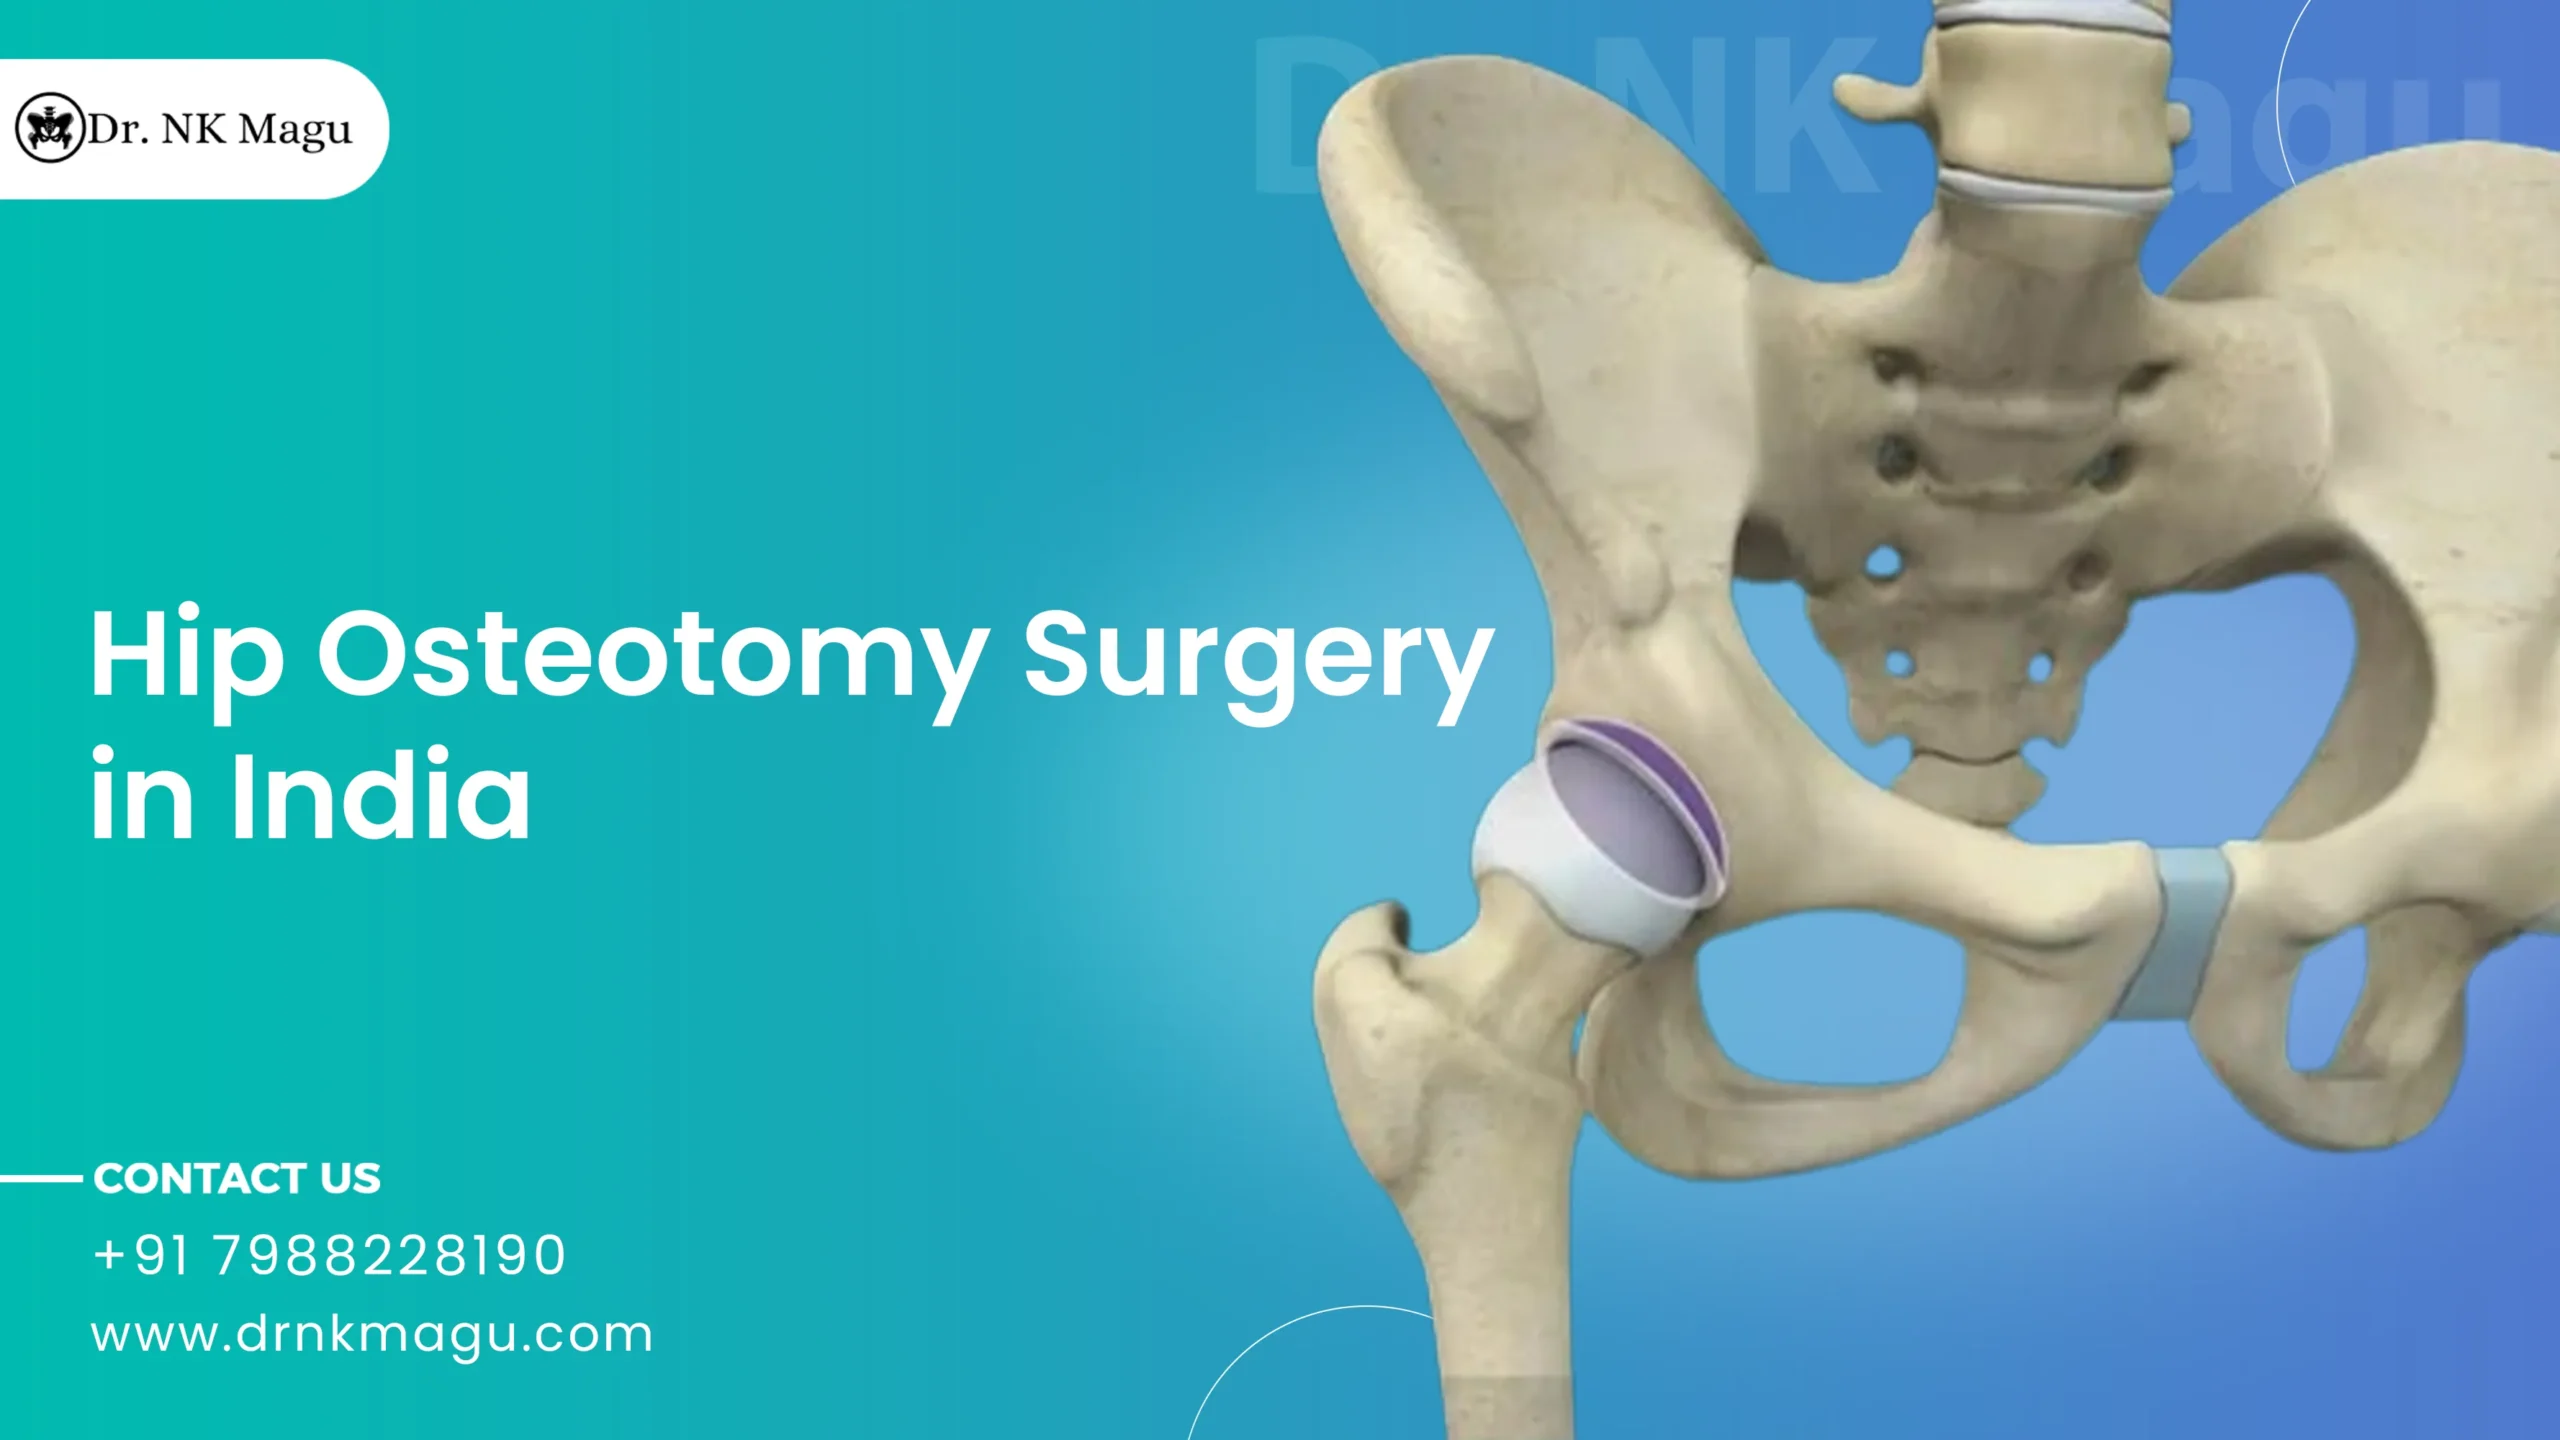 Hip Osteotomy Surgery Cost in India